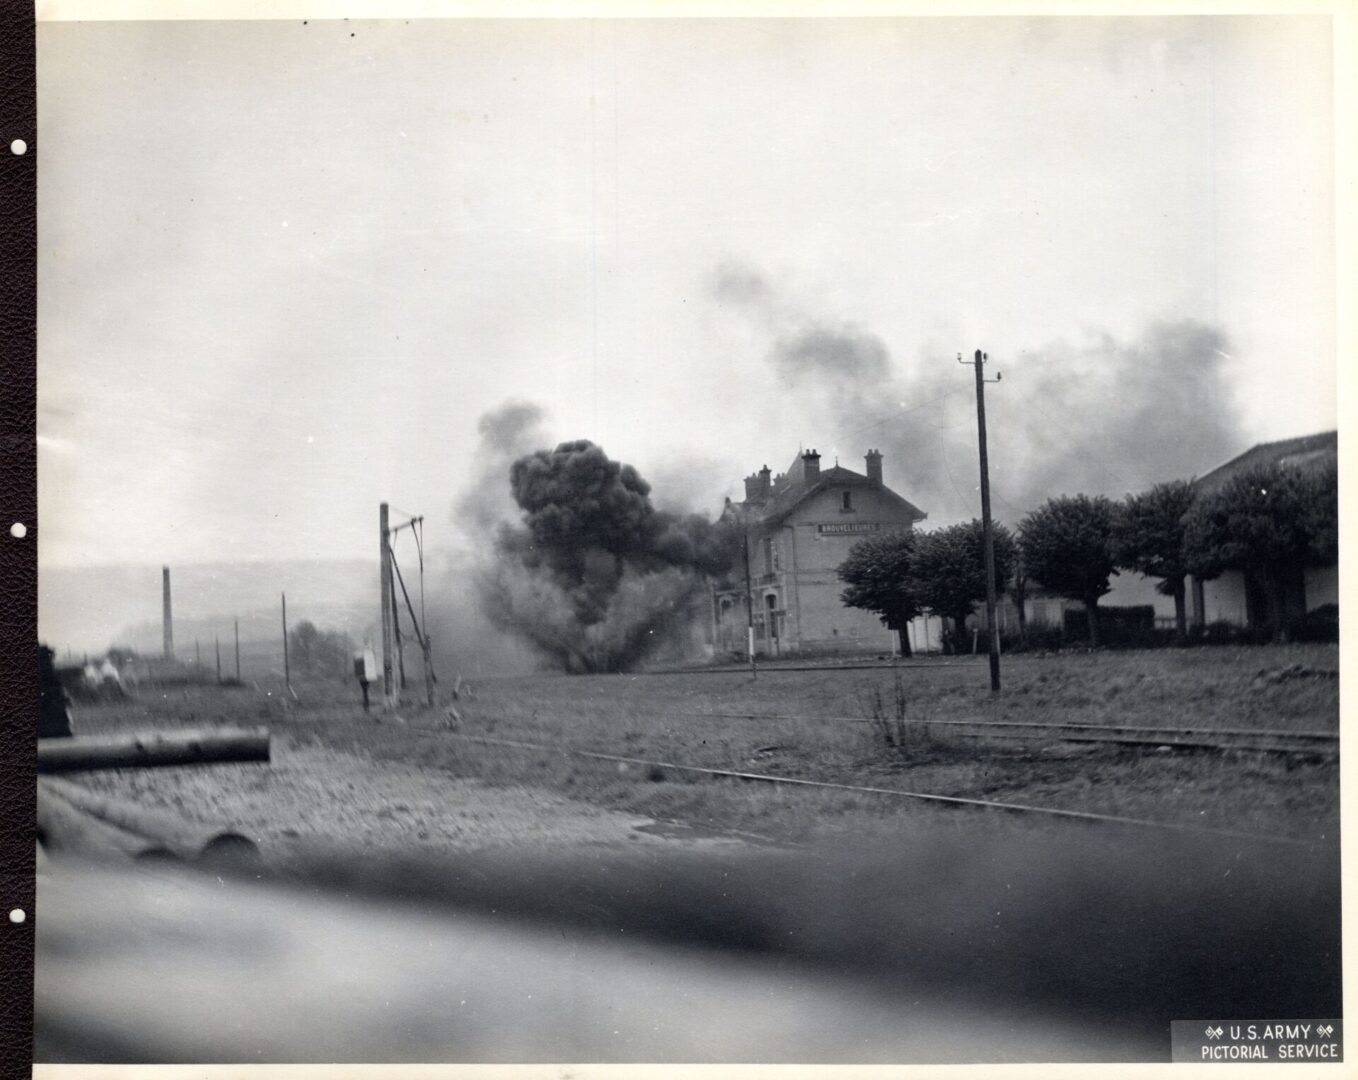 American artillery attack ruined a town in Germany